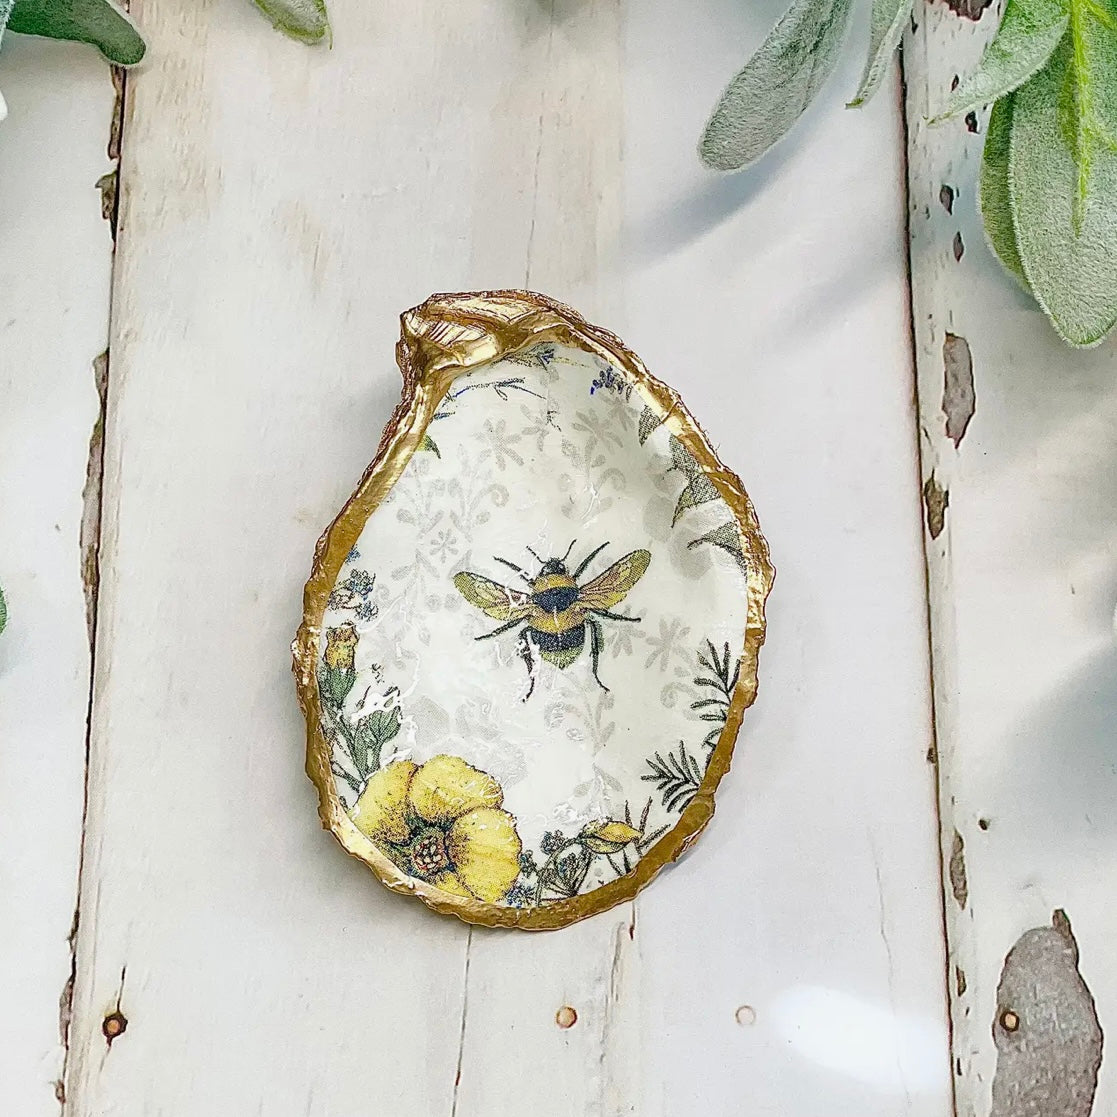 Bee and Wildflowers Oyster Trinket Dish